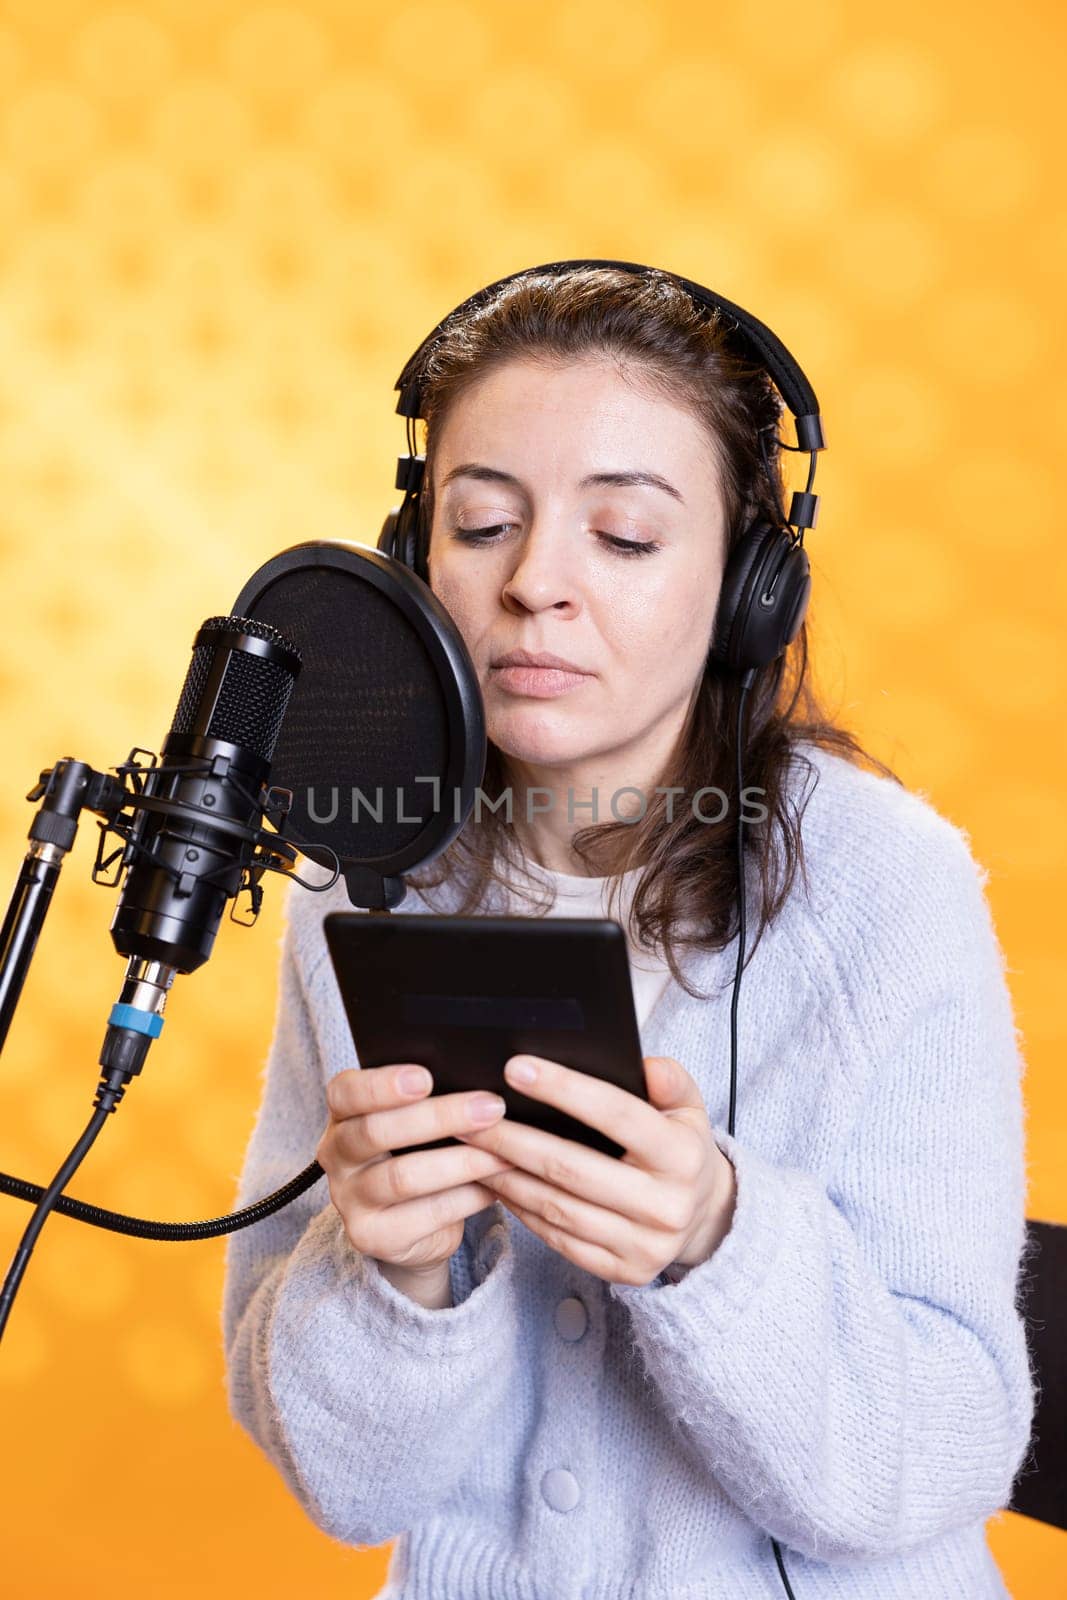 Narrator using storytelling skills while reading ebook, recording audiobook by DCStudio